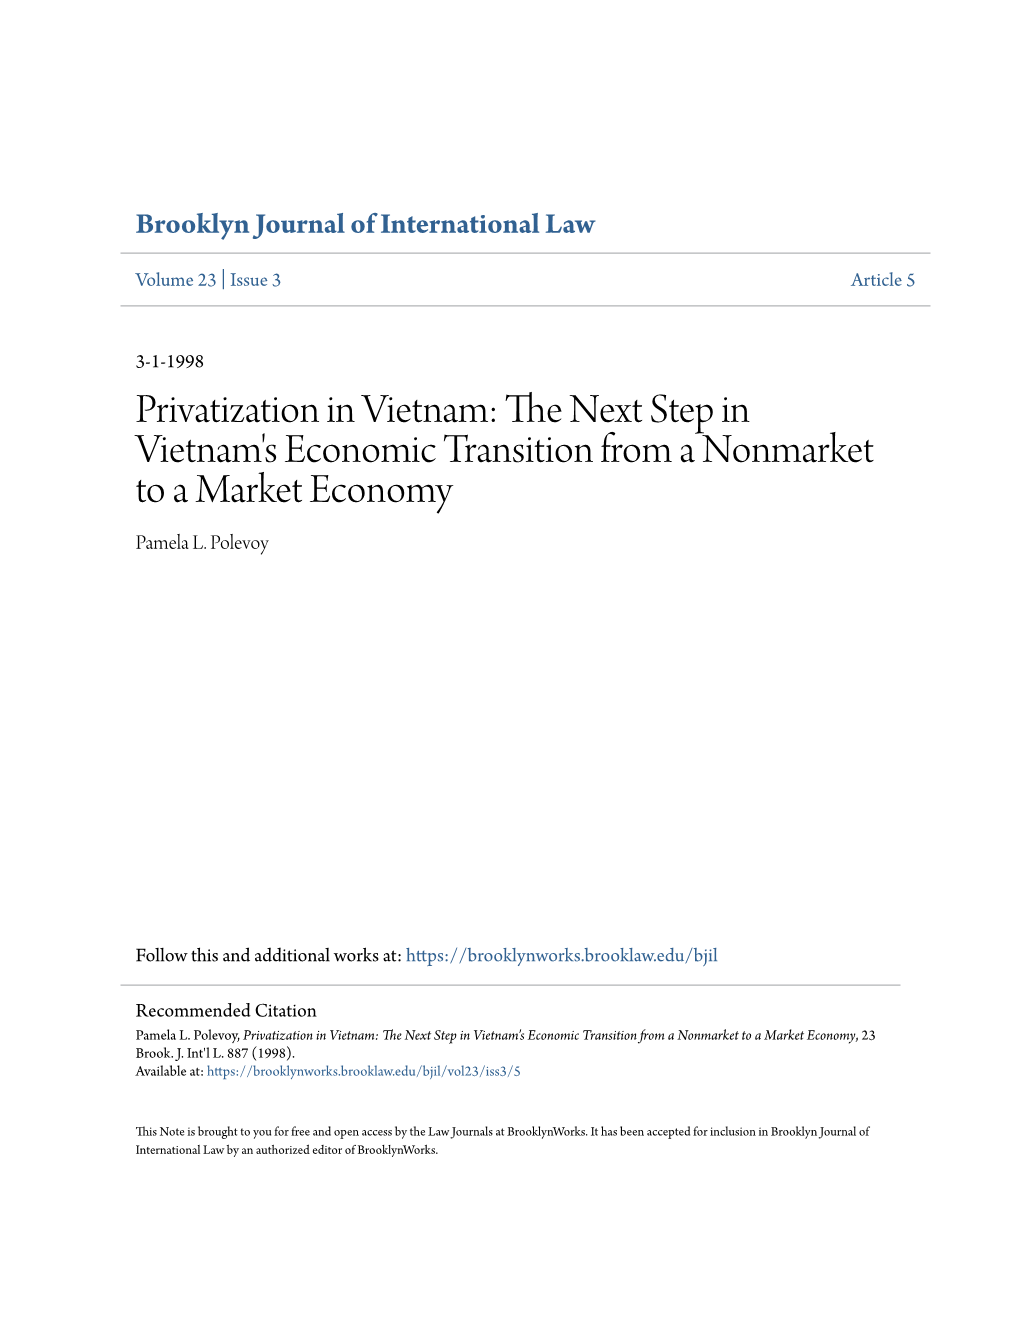 Privatization in Vietnam: the Exn T Step in Vietnam's Economic Transition from a Nonmarket to a Market Economy Pamela L